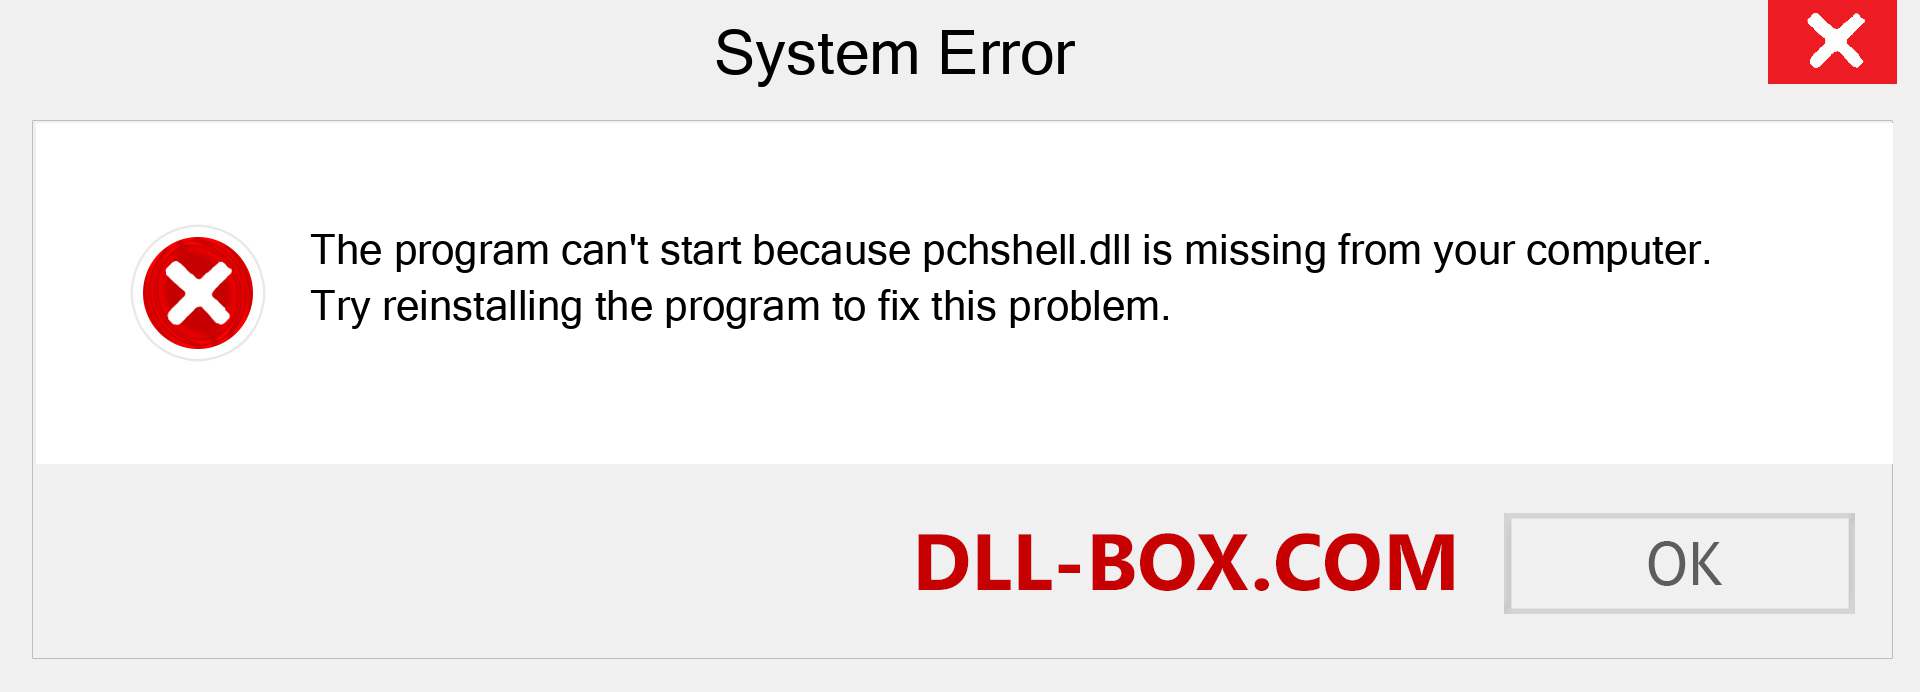  pchshell.dll file is missing?. Download for Windows 7, 8, 10 - Fix  pchshell dll Missing Error on Windows, photos, images